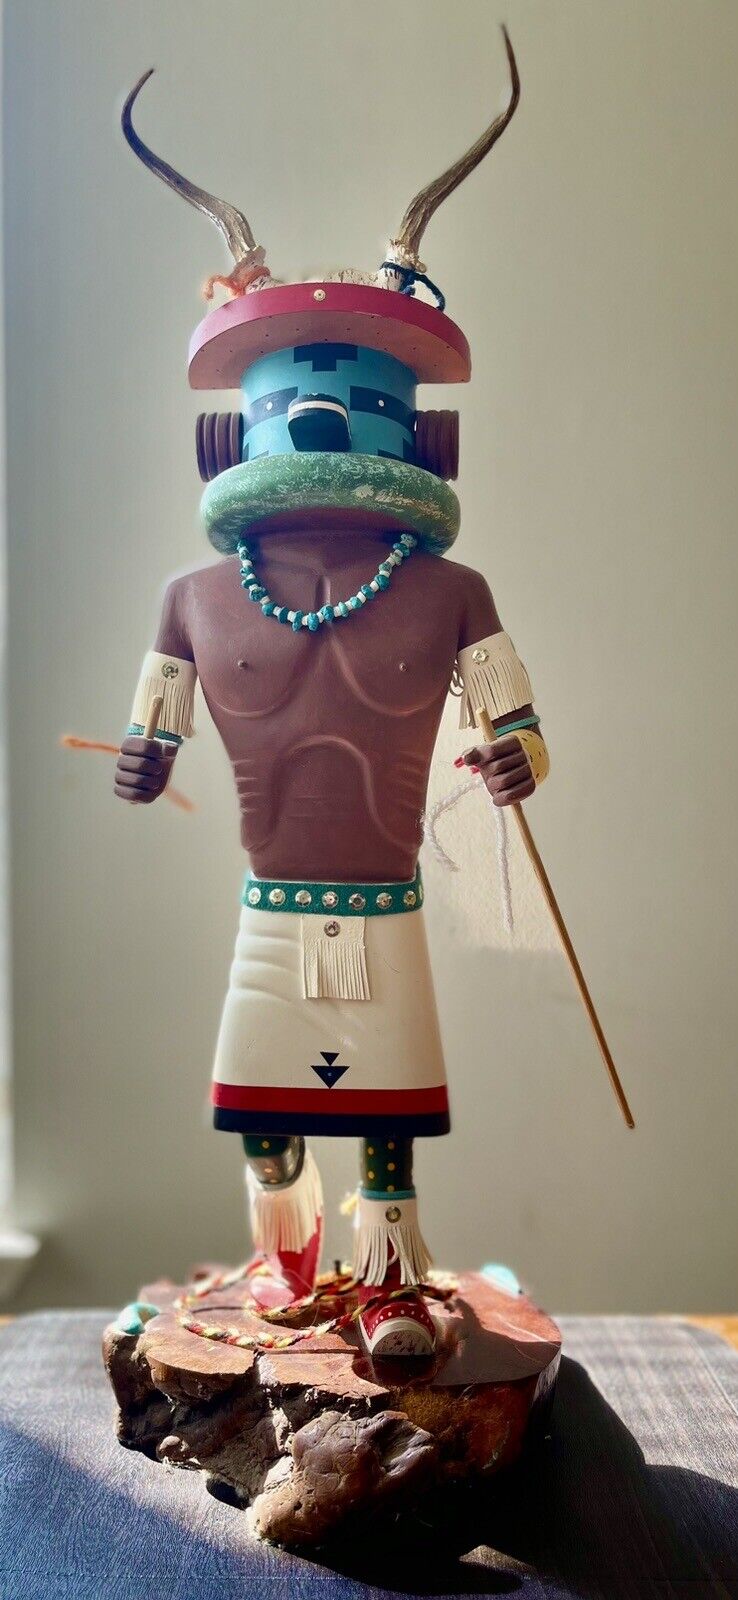 Vintage Hopi Inspired Kachina Doll Crafted By Robert (Bob) Rainey